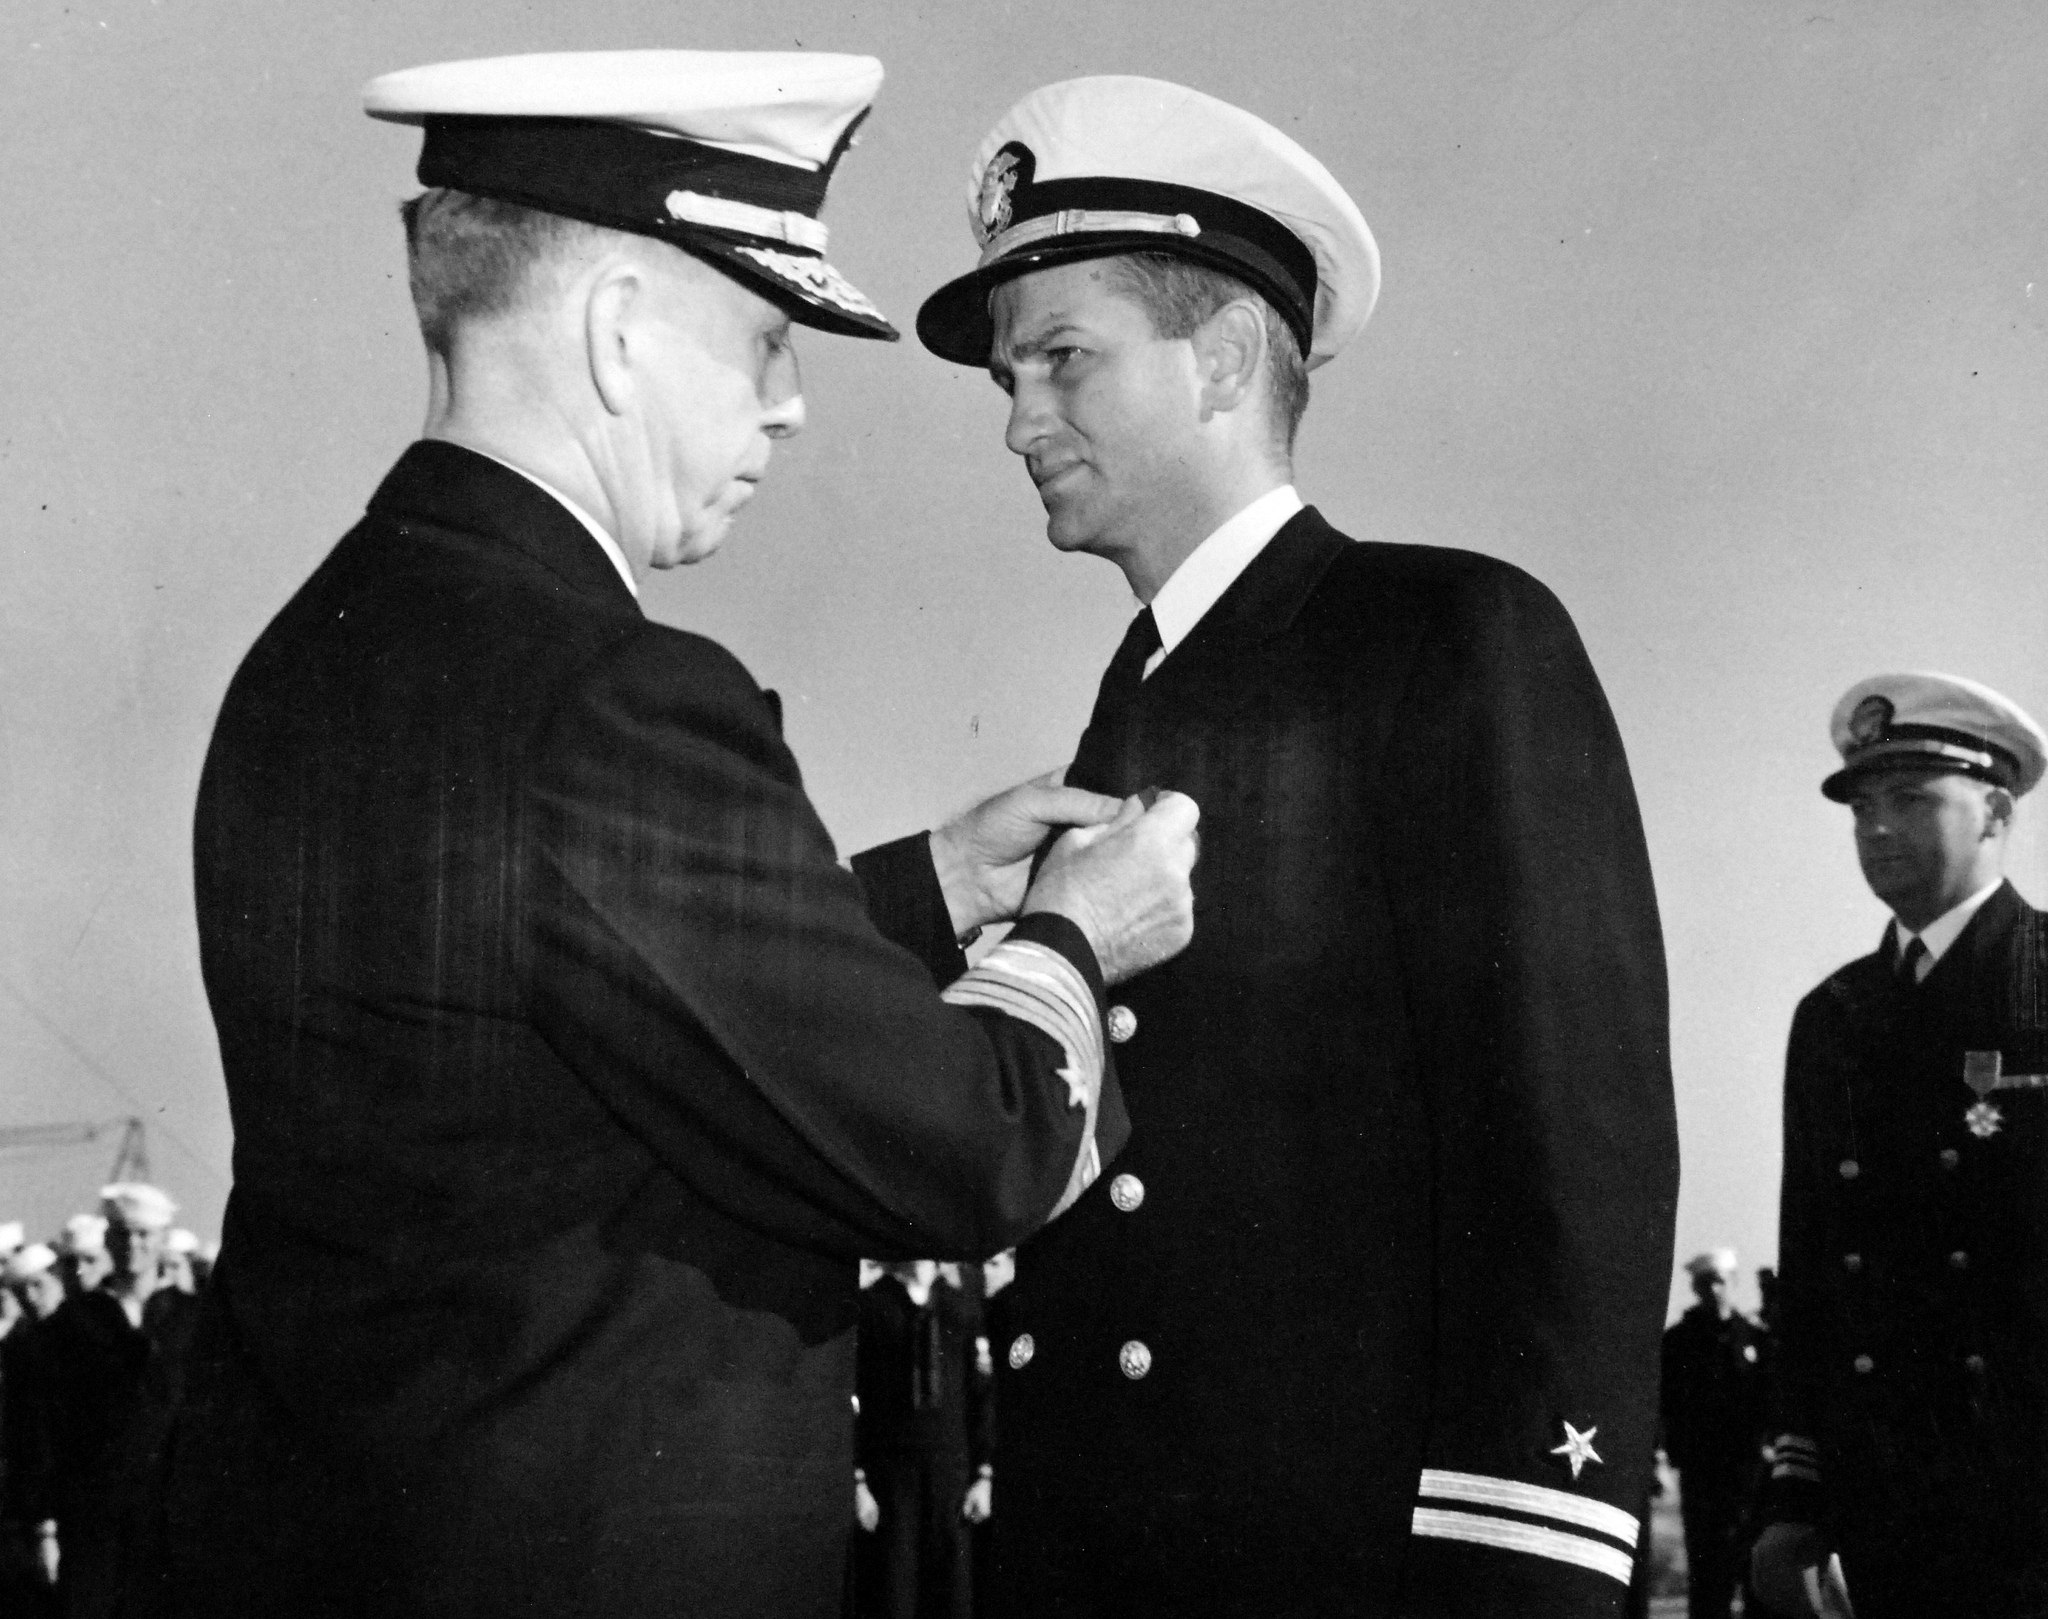 On the flight deck of USS Card, Admiral Royal E. Ingersoll, Commander-in-Chief Atlantic Fleet, awarding the Navy Cross to Lieutenant Charles Hutchins, Captain of USS Borie, for actions against German U-405.